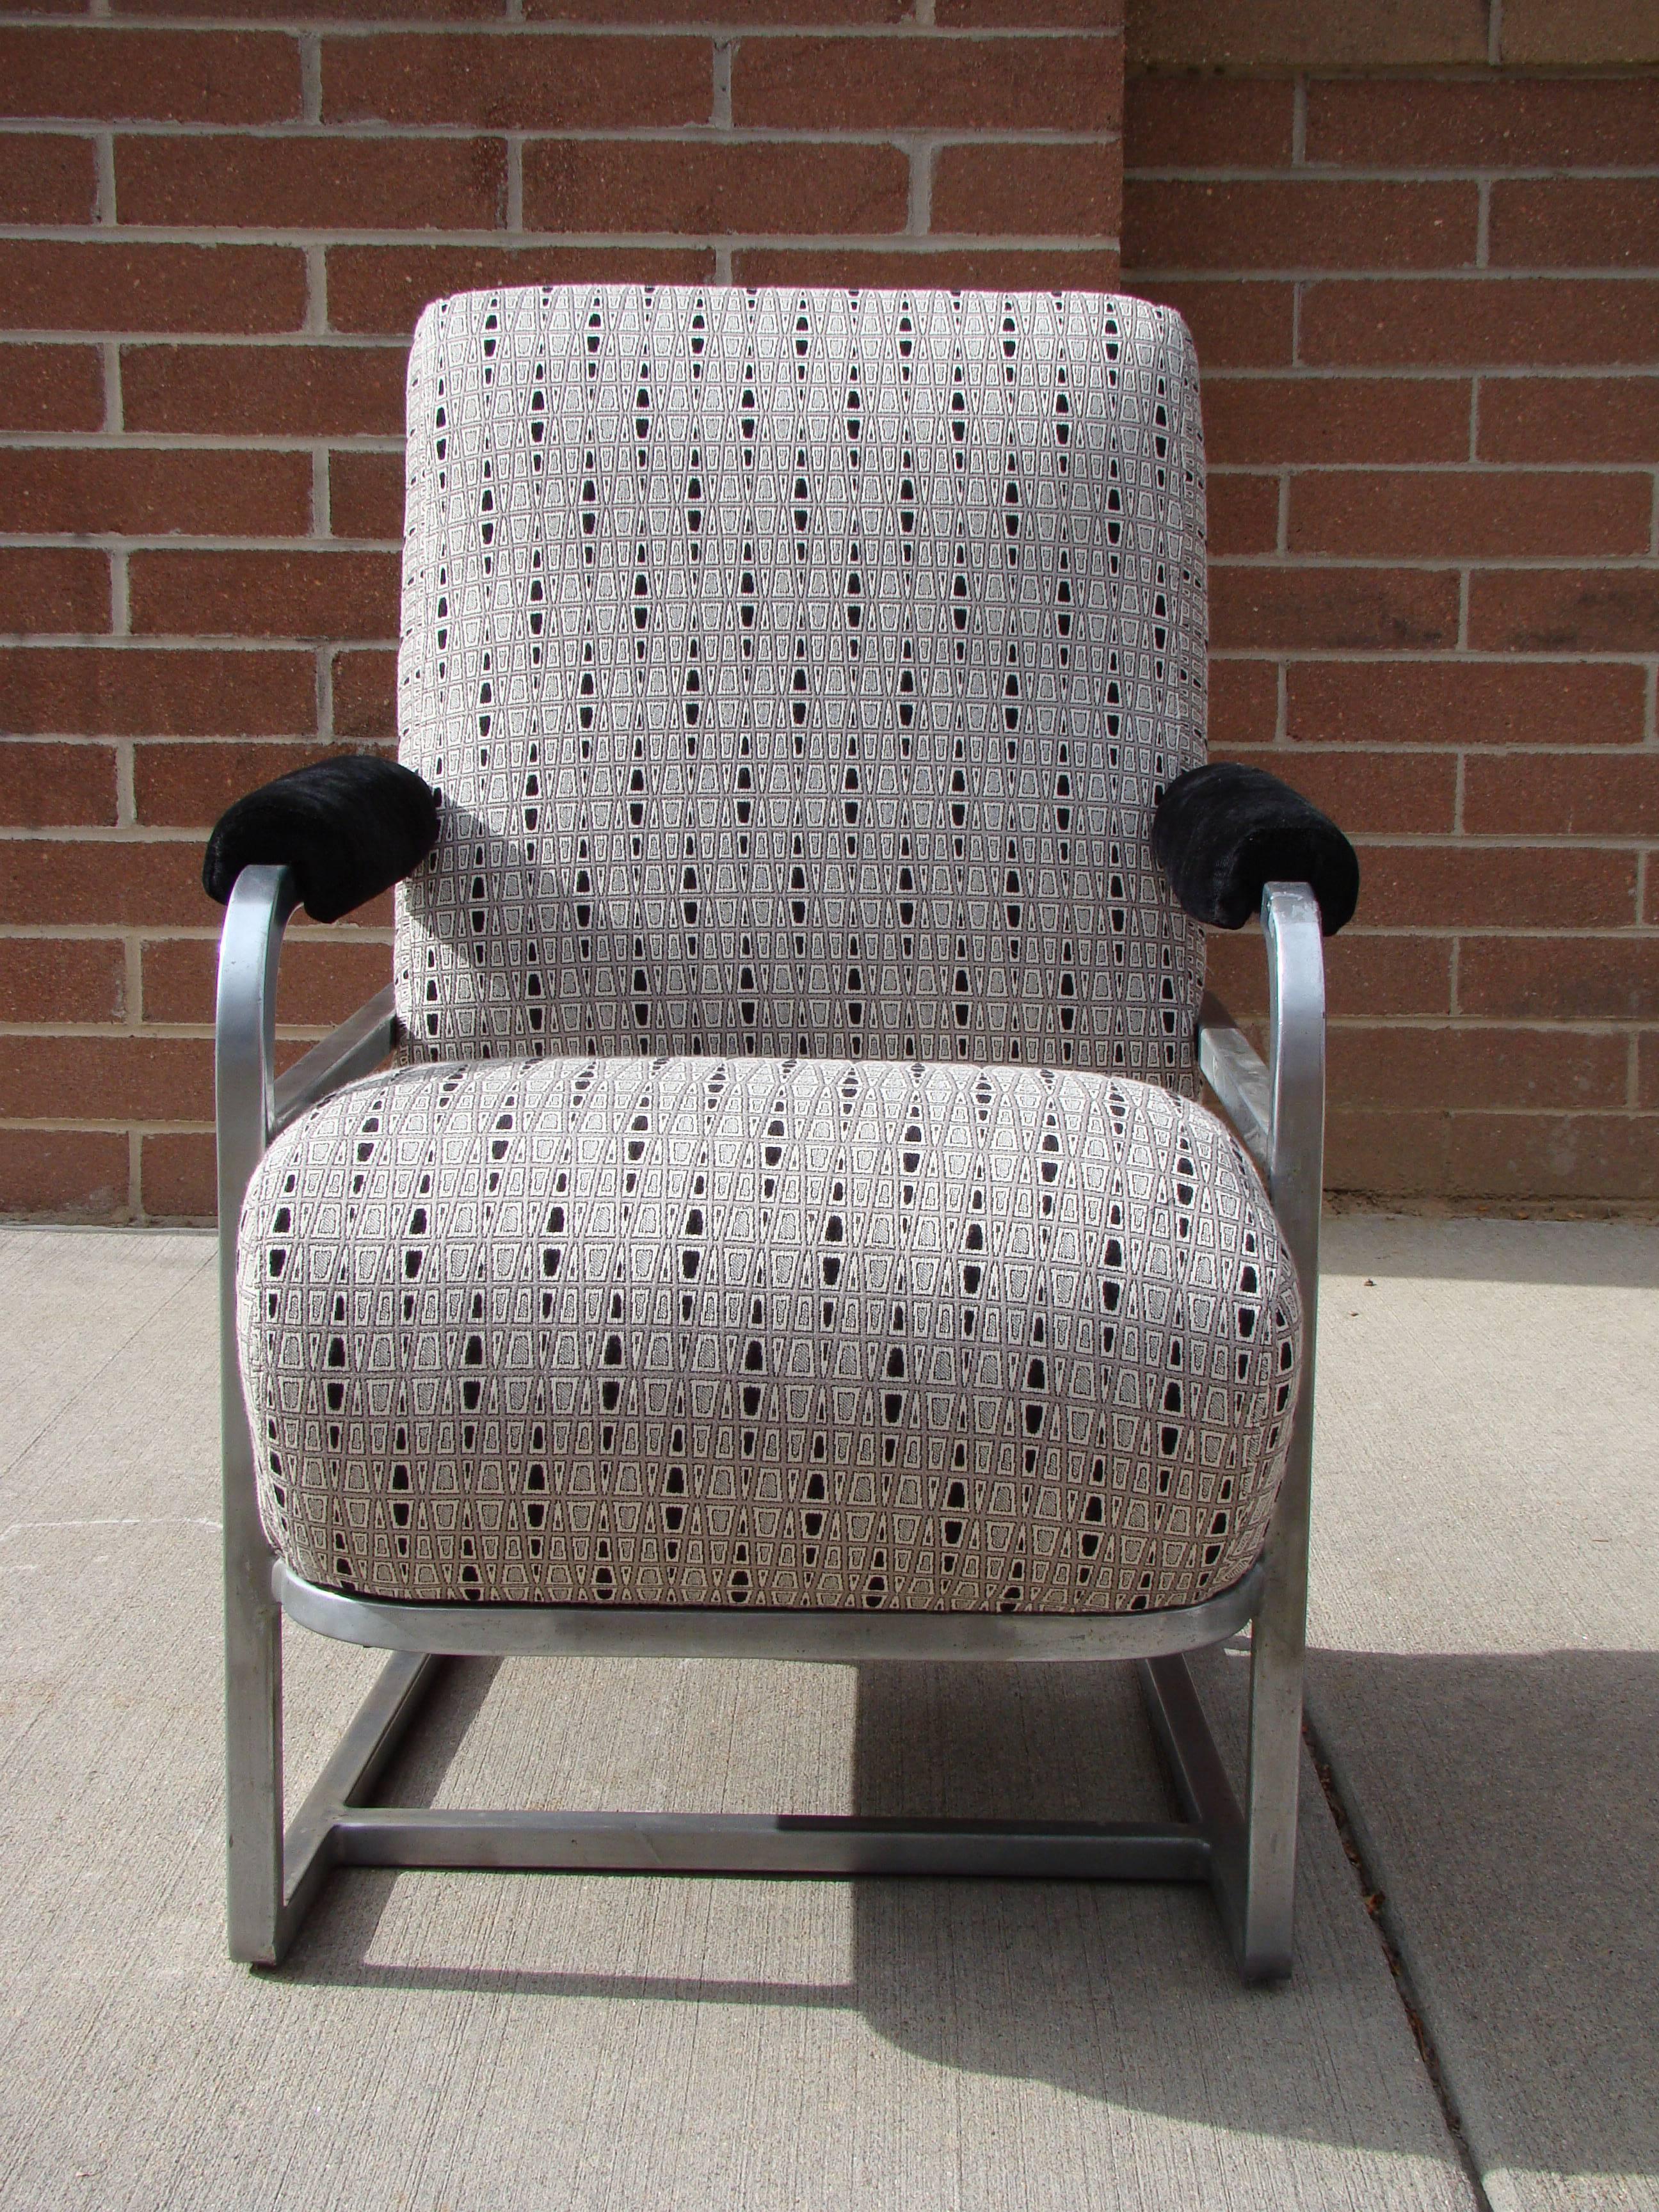 Art Deco Machine Age tubular aluminum railroad lounge chair. Has been reupholstered.